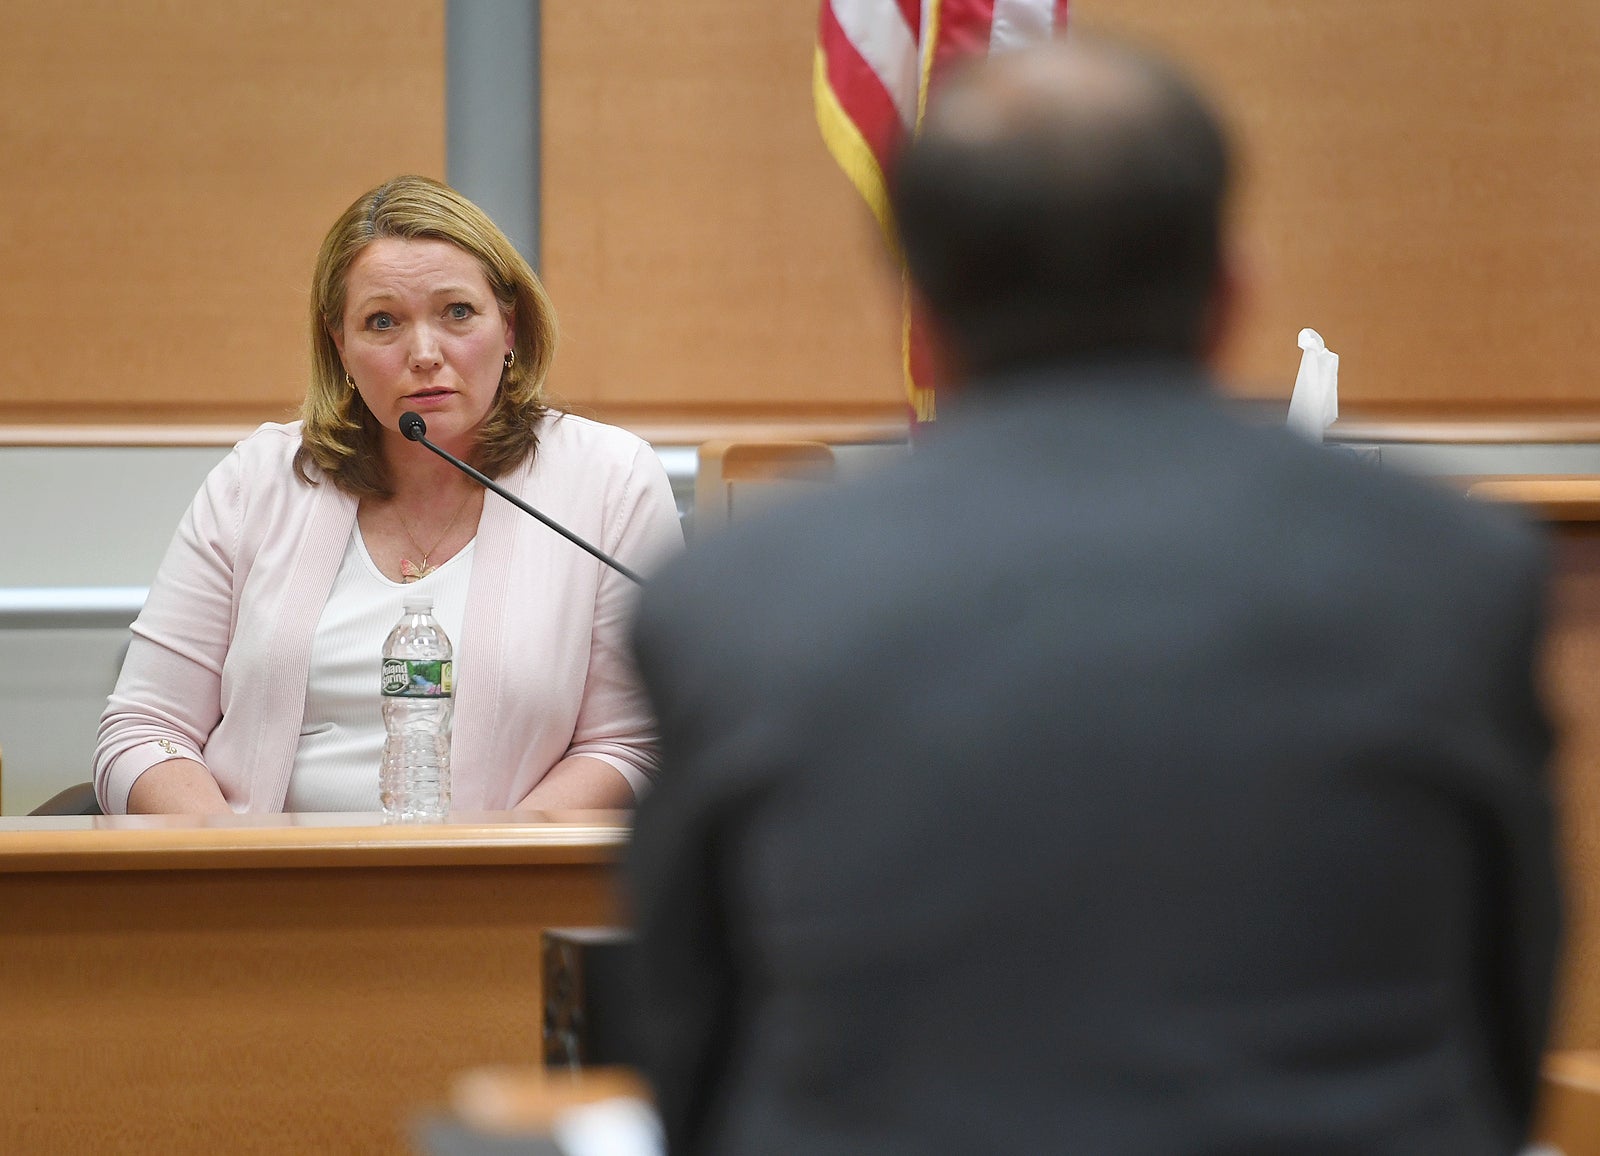 Nicole Hockley, mother of deceased Sandy Hook Elementary student Dylan Hockley, answers questions from lawyer Chris Mattei during her testimony in the Alex Jones defamation trial